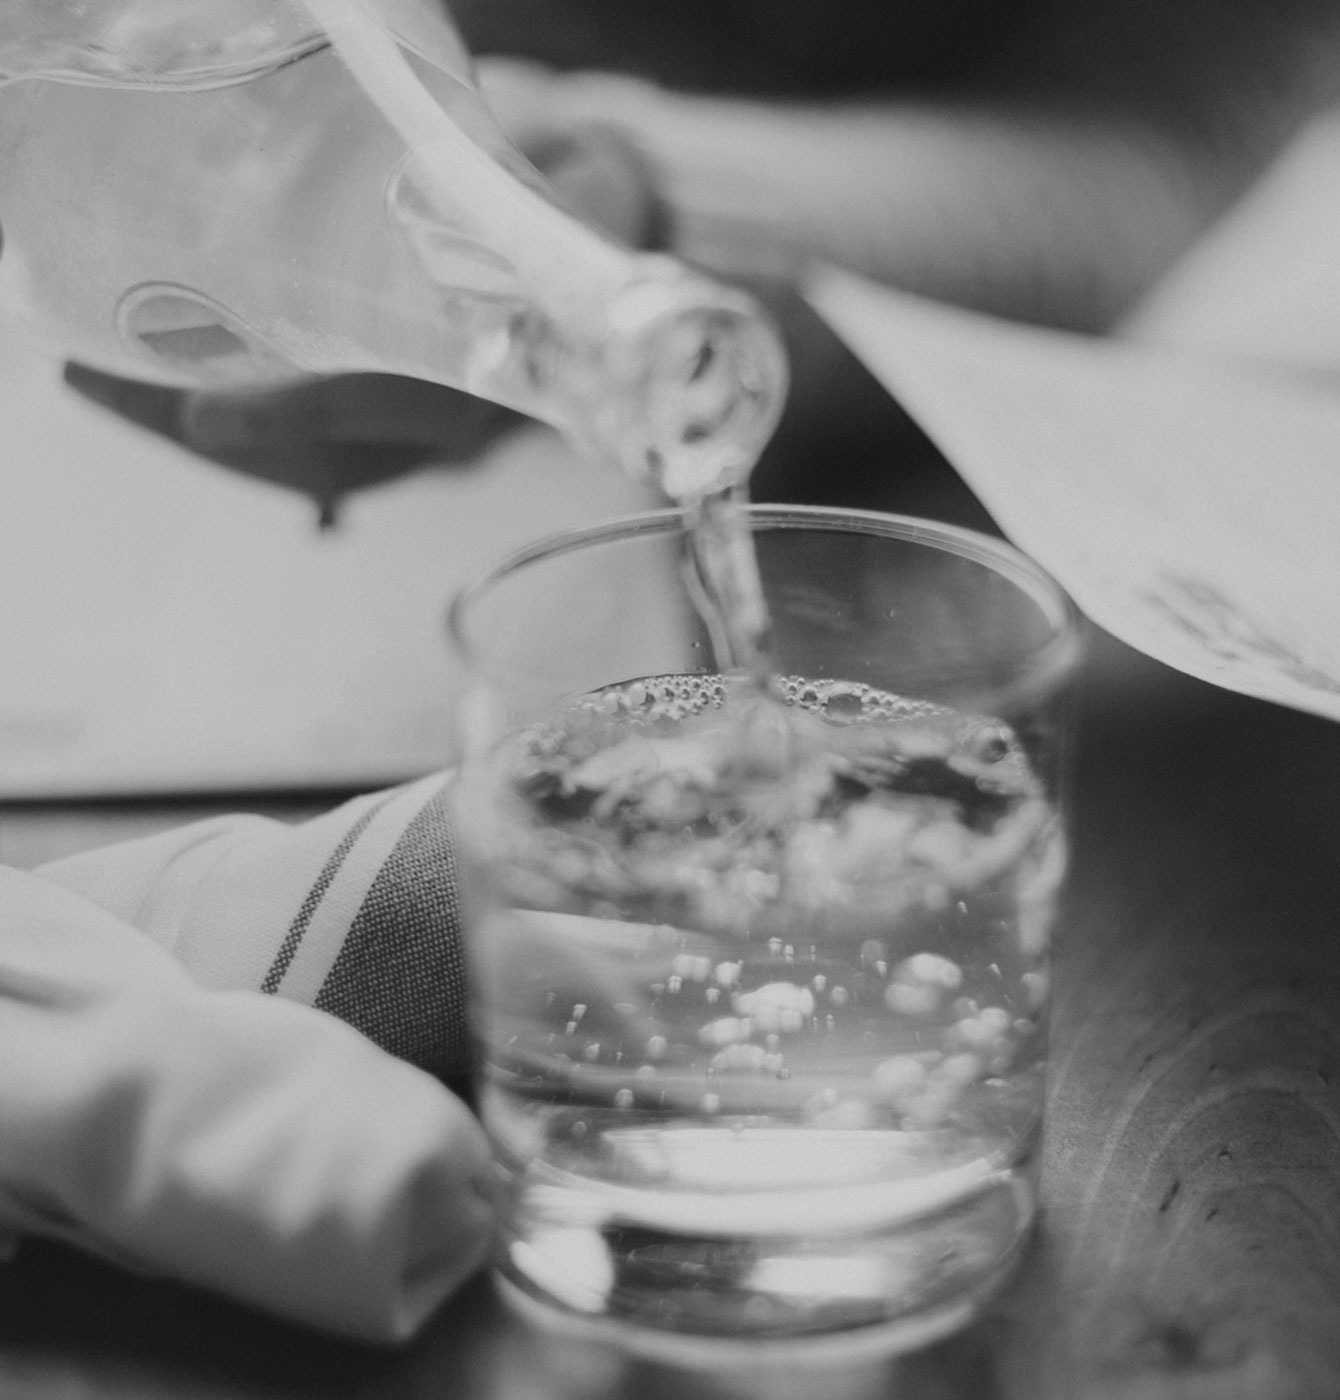 Photograph of someone pouring water from a bottle into a glass (restaurant setting)